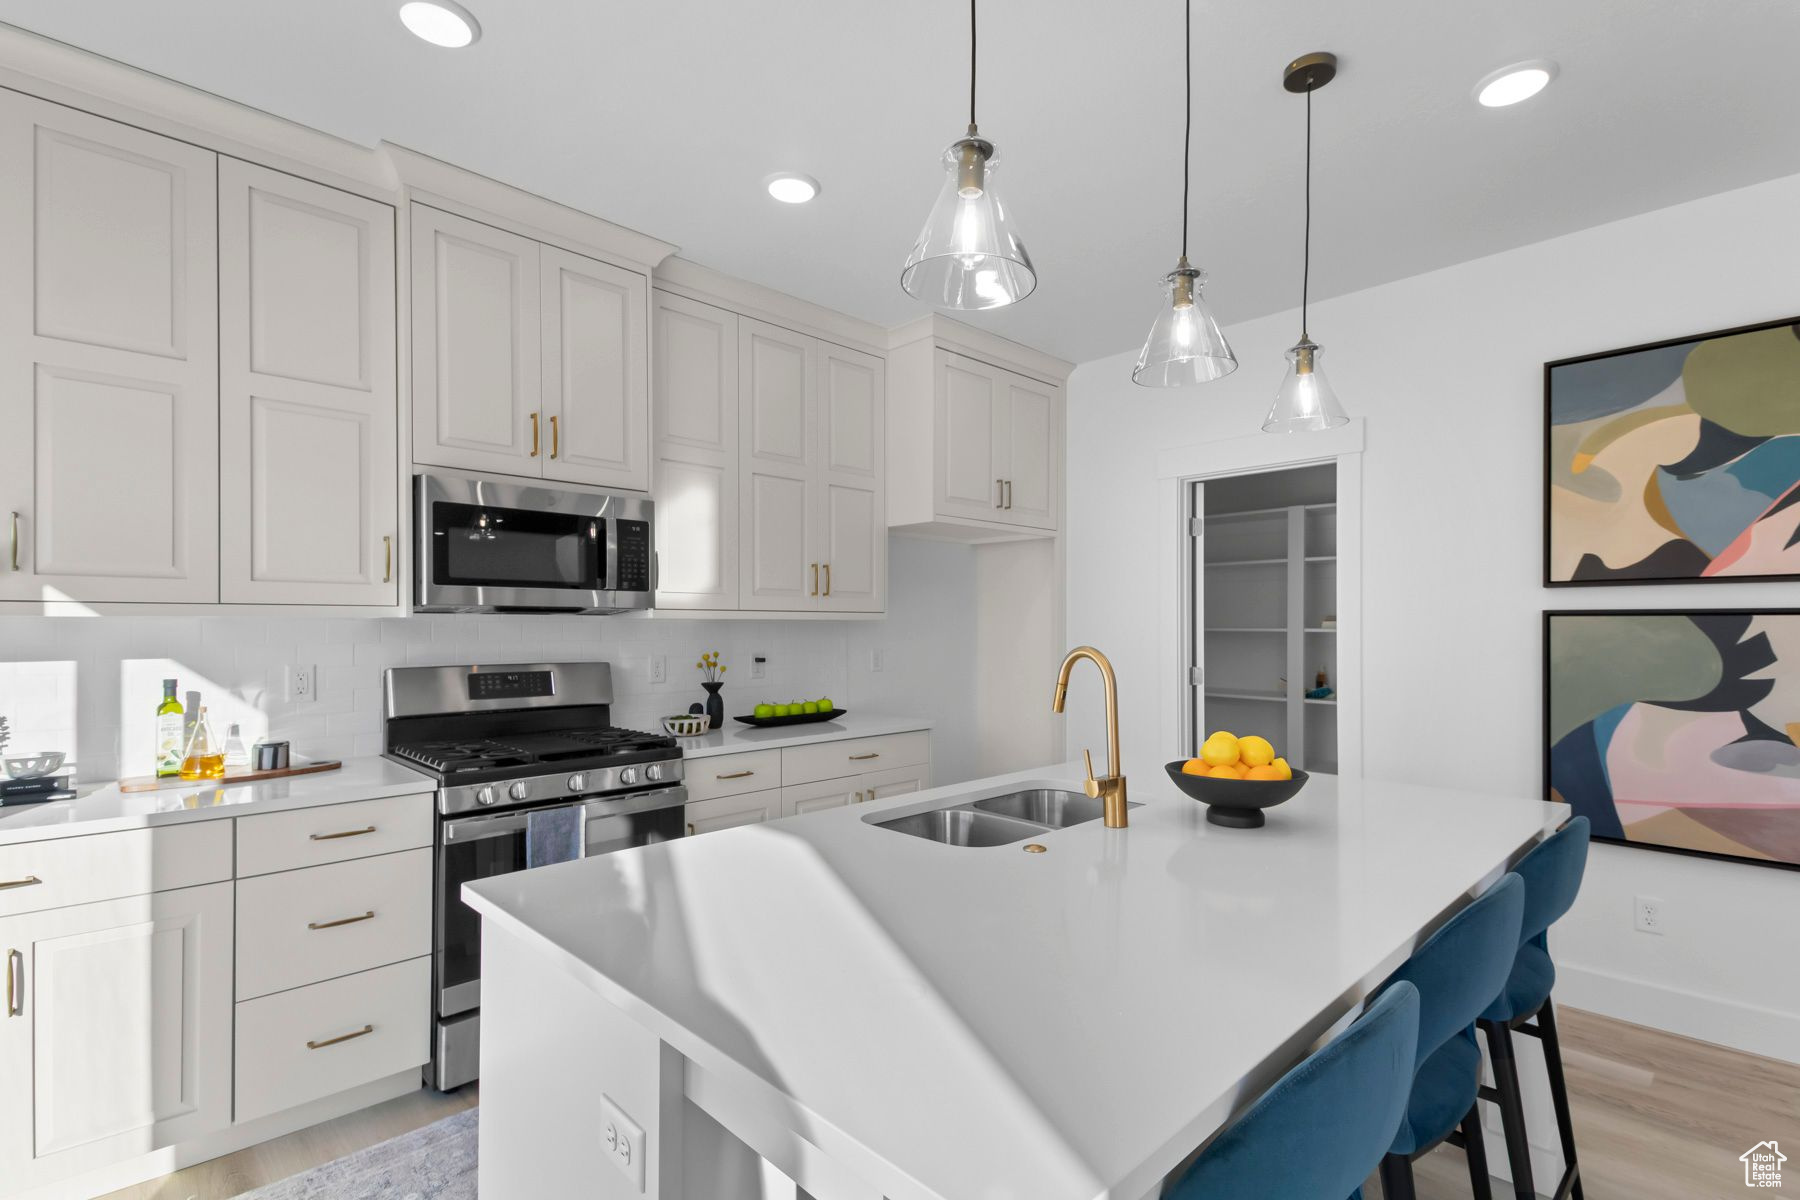 Kitchen featuring appliances with stainless steel finishes, a center island with sink, light hardwood / wood-style floors, tasteful backsplash, and sink